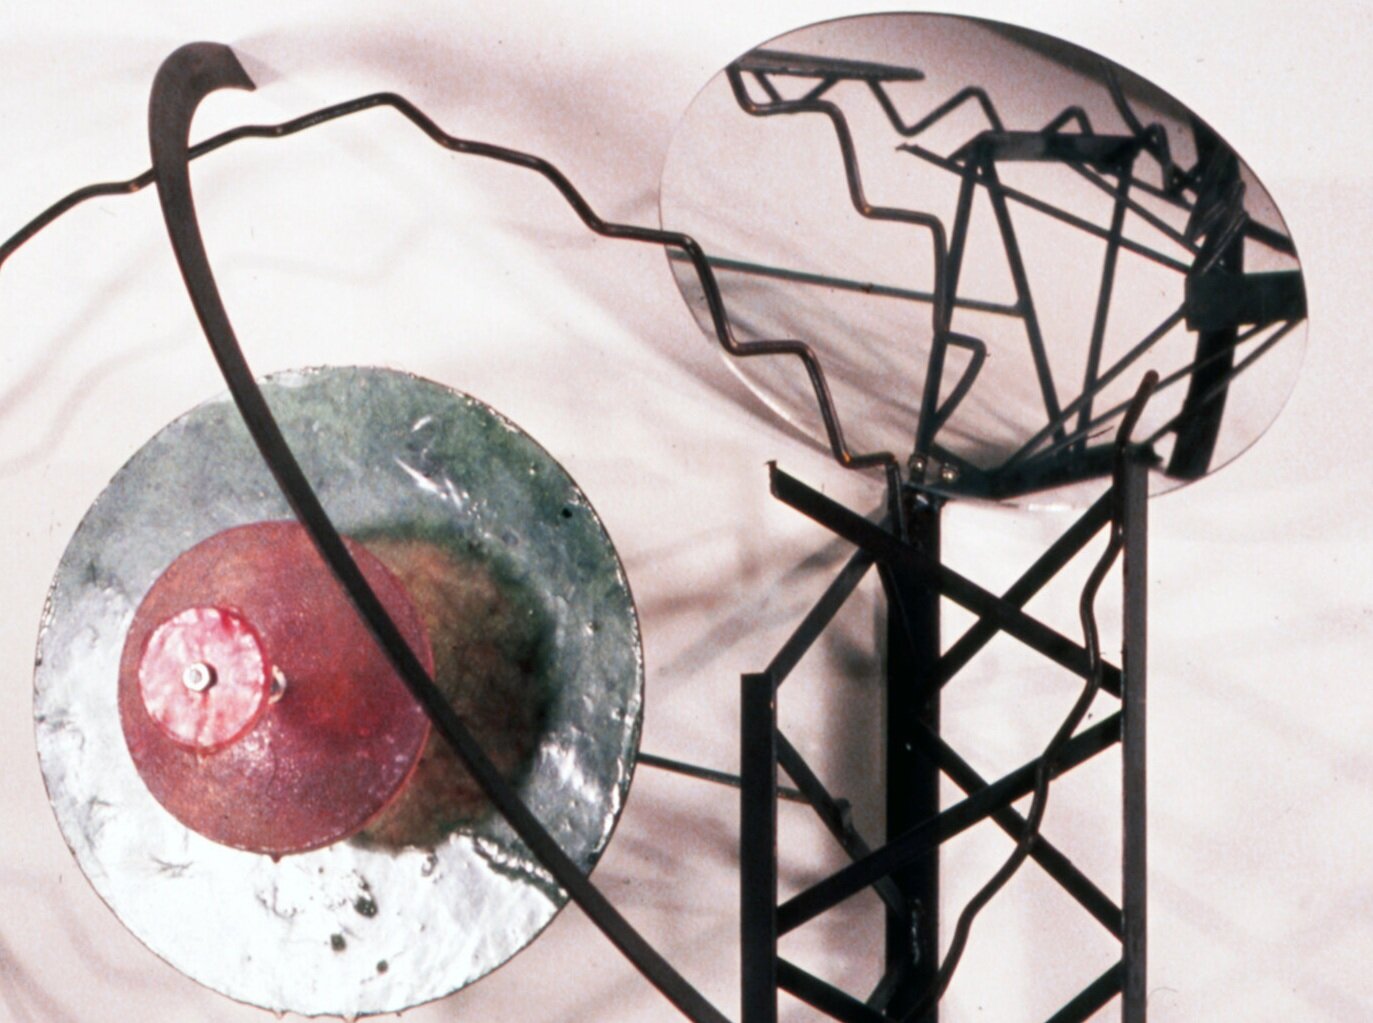  detail, Discs and Hoops (1999), steel, fiberglass, pigmented resin, and plexiglass, 30 x 28 x 14 inches (76.2 x 71.1 x 35.5 cm) 